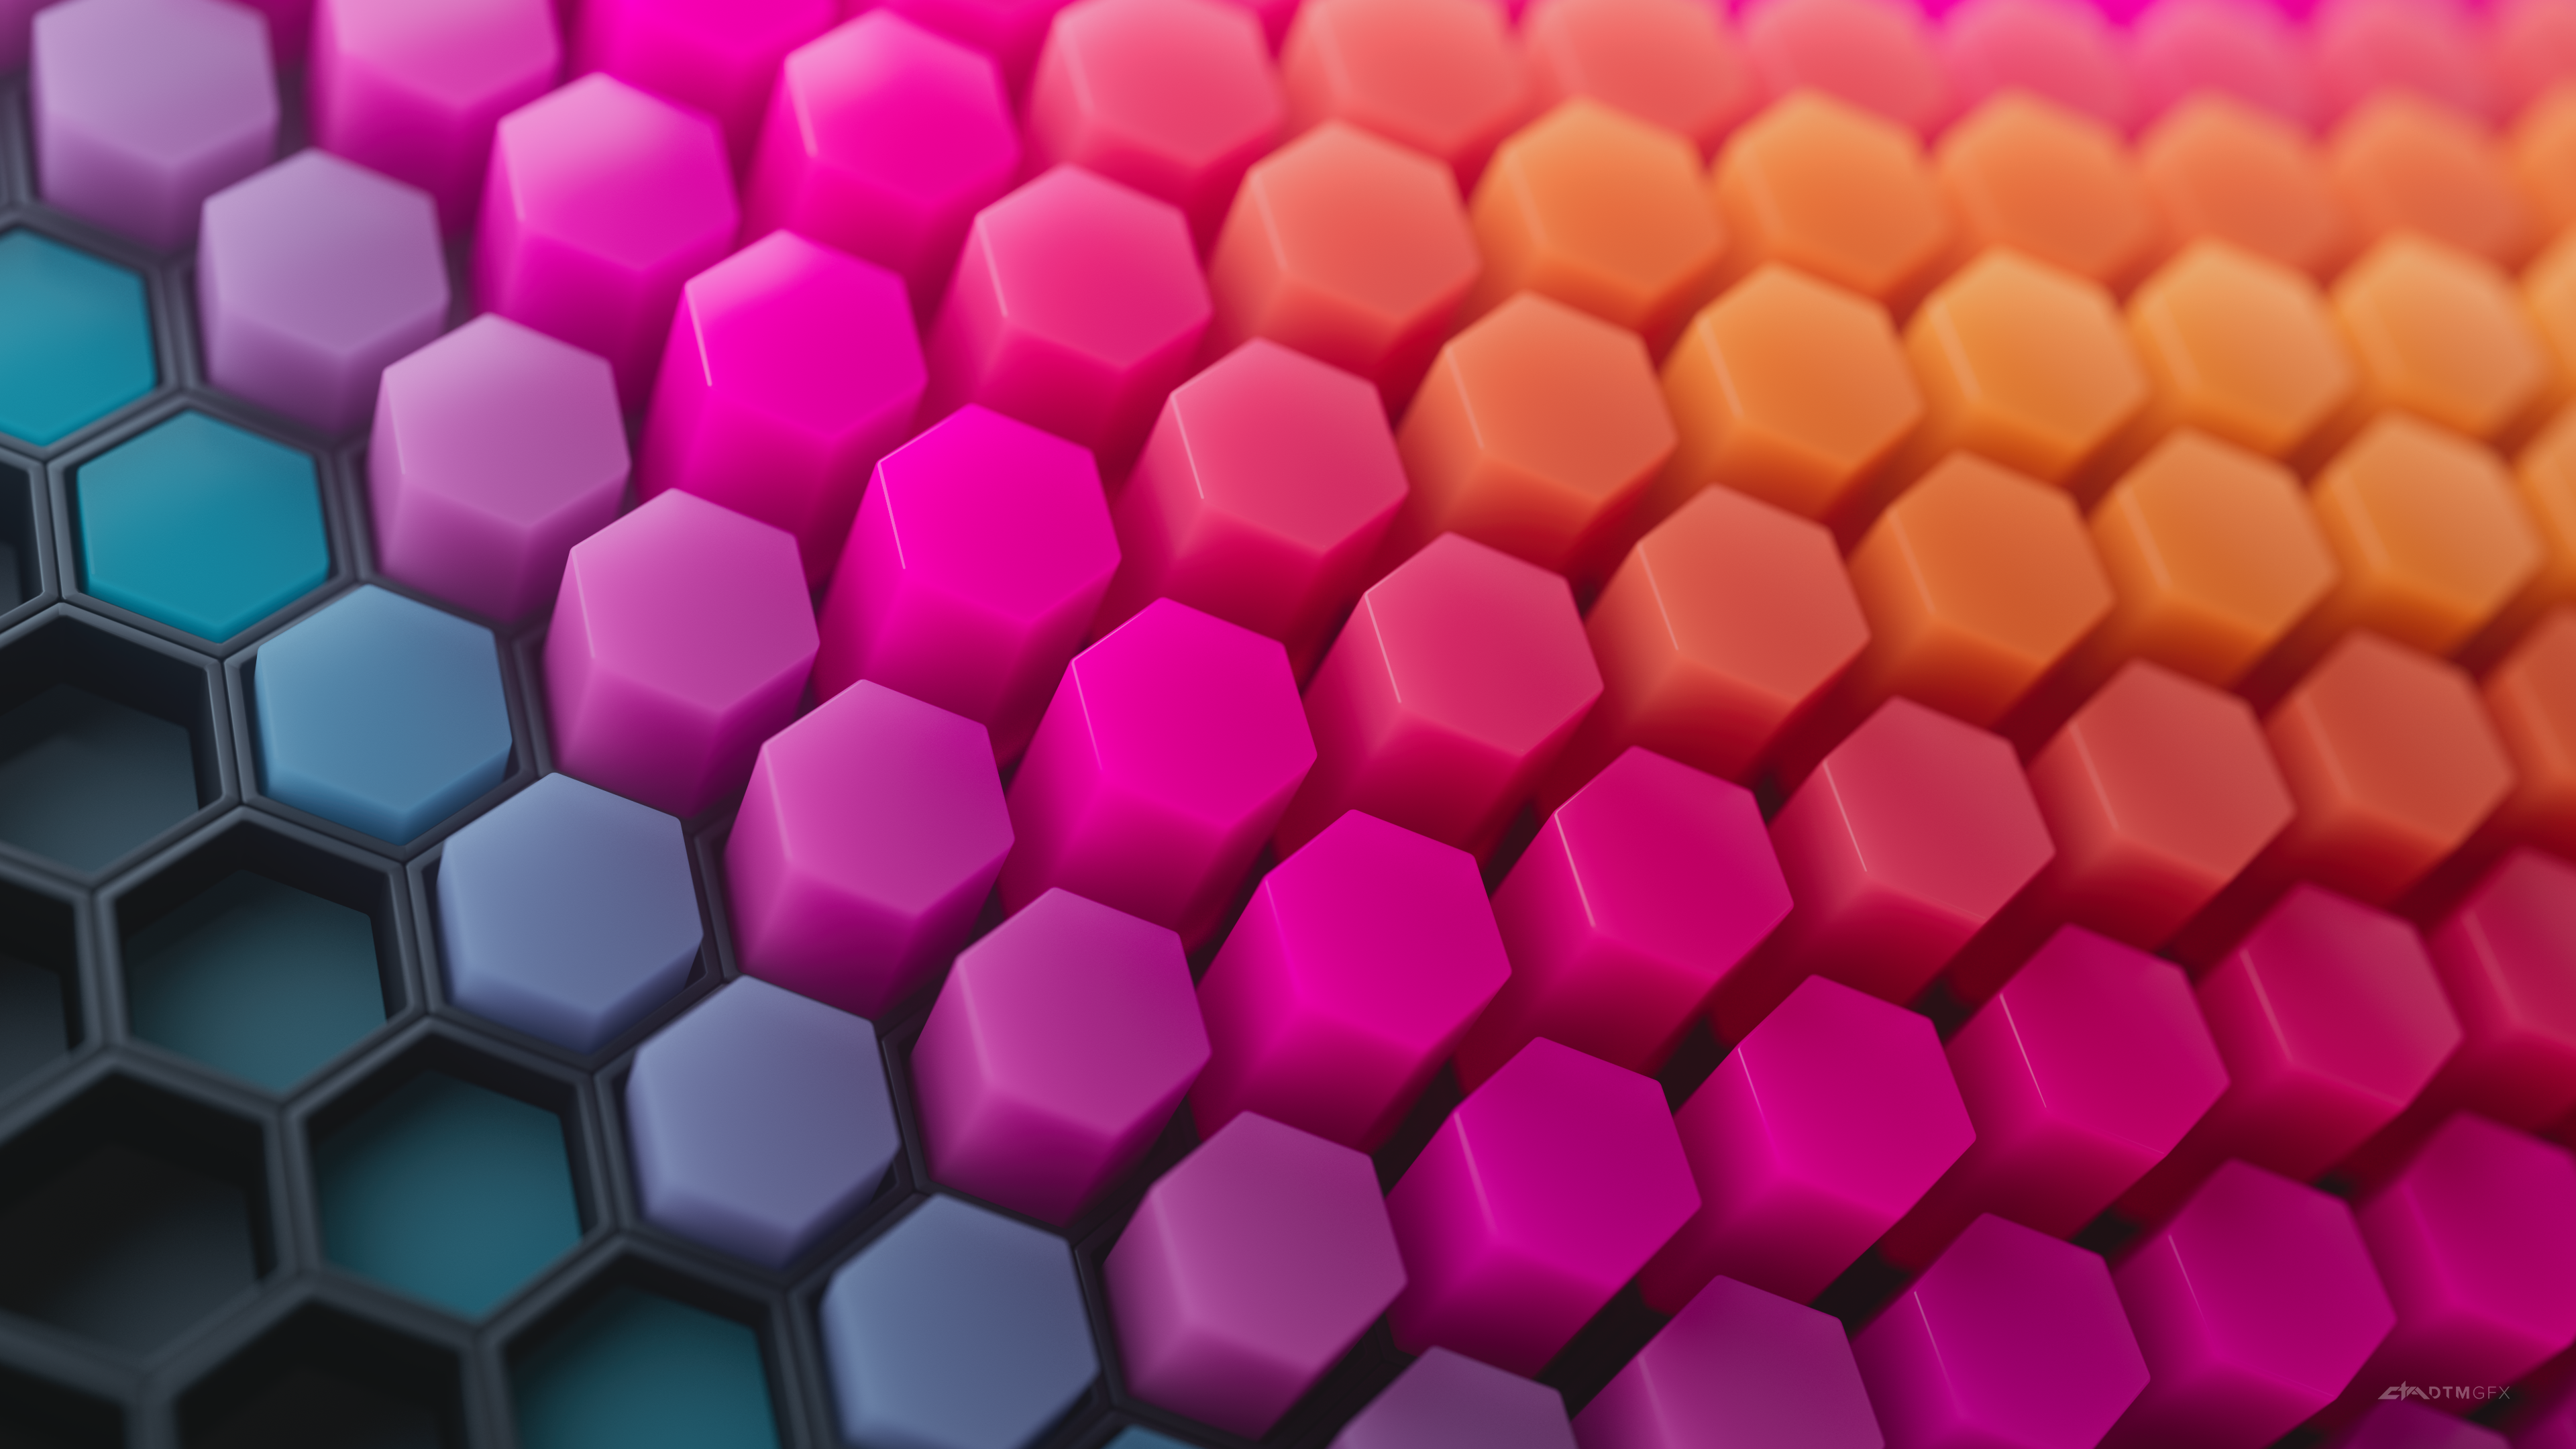 Hexagons Wallpaper 4K, Patterns, Colorful background, Colorful blocks, Abstract